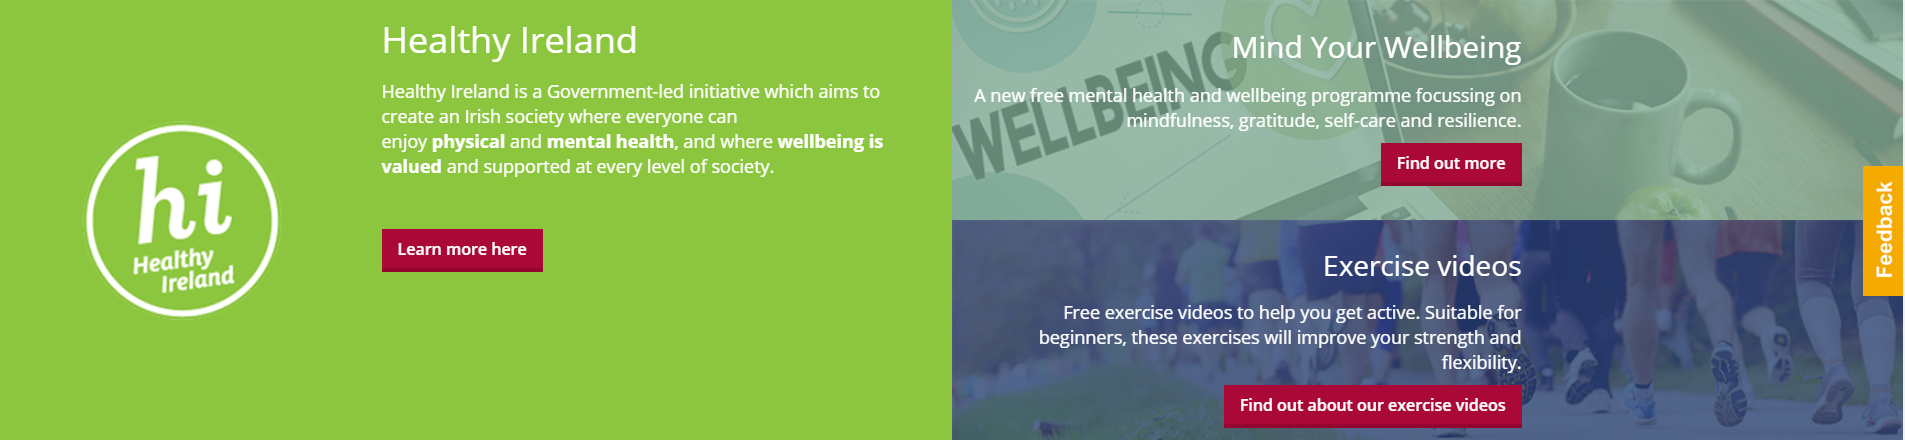 screenshot of colour contrast issues on the Health and Wellbeing webpage. The white writing against the coloured background is difficult to distinguish.